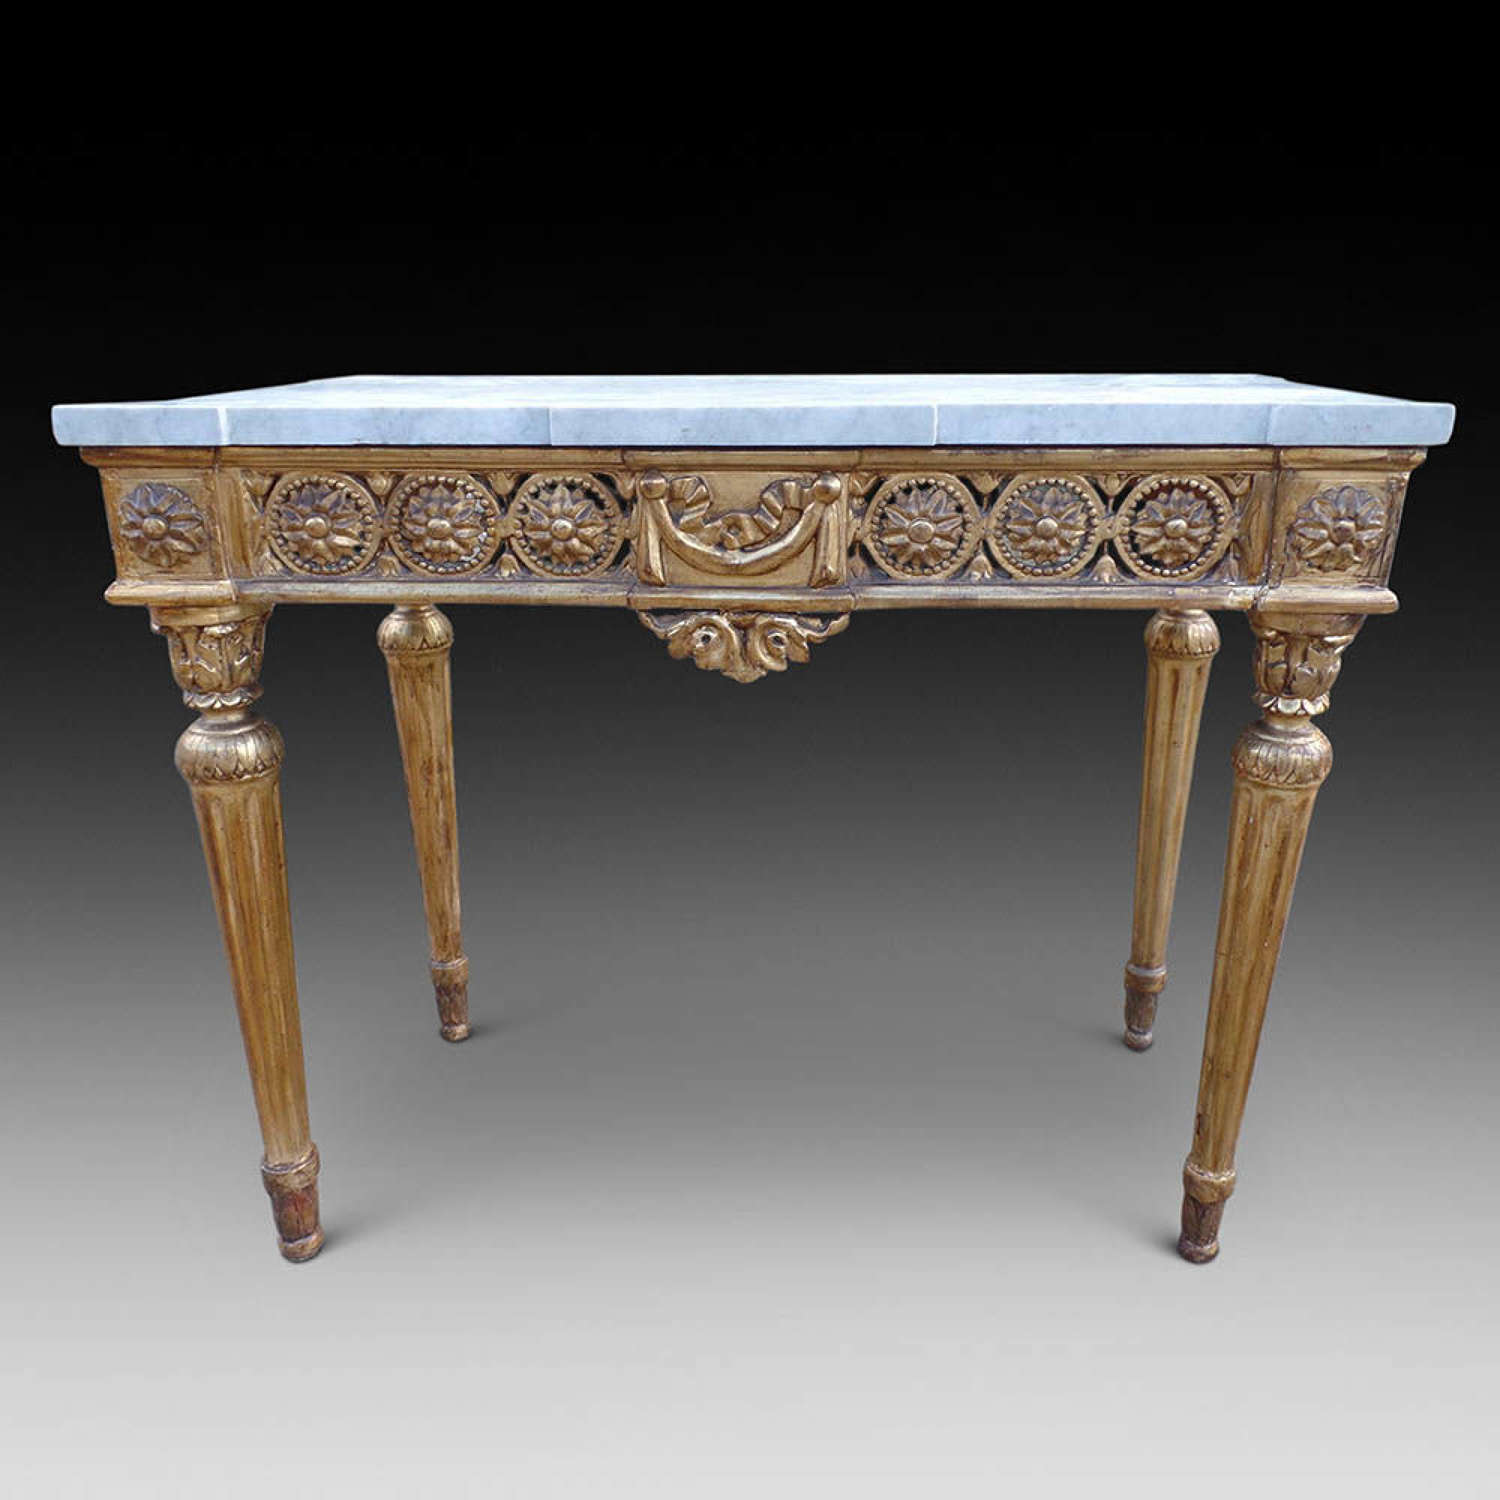 Italian Gilt Console Table Standing On Fine Reeded Legs C.1815